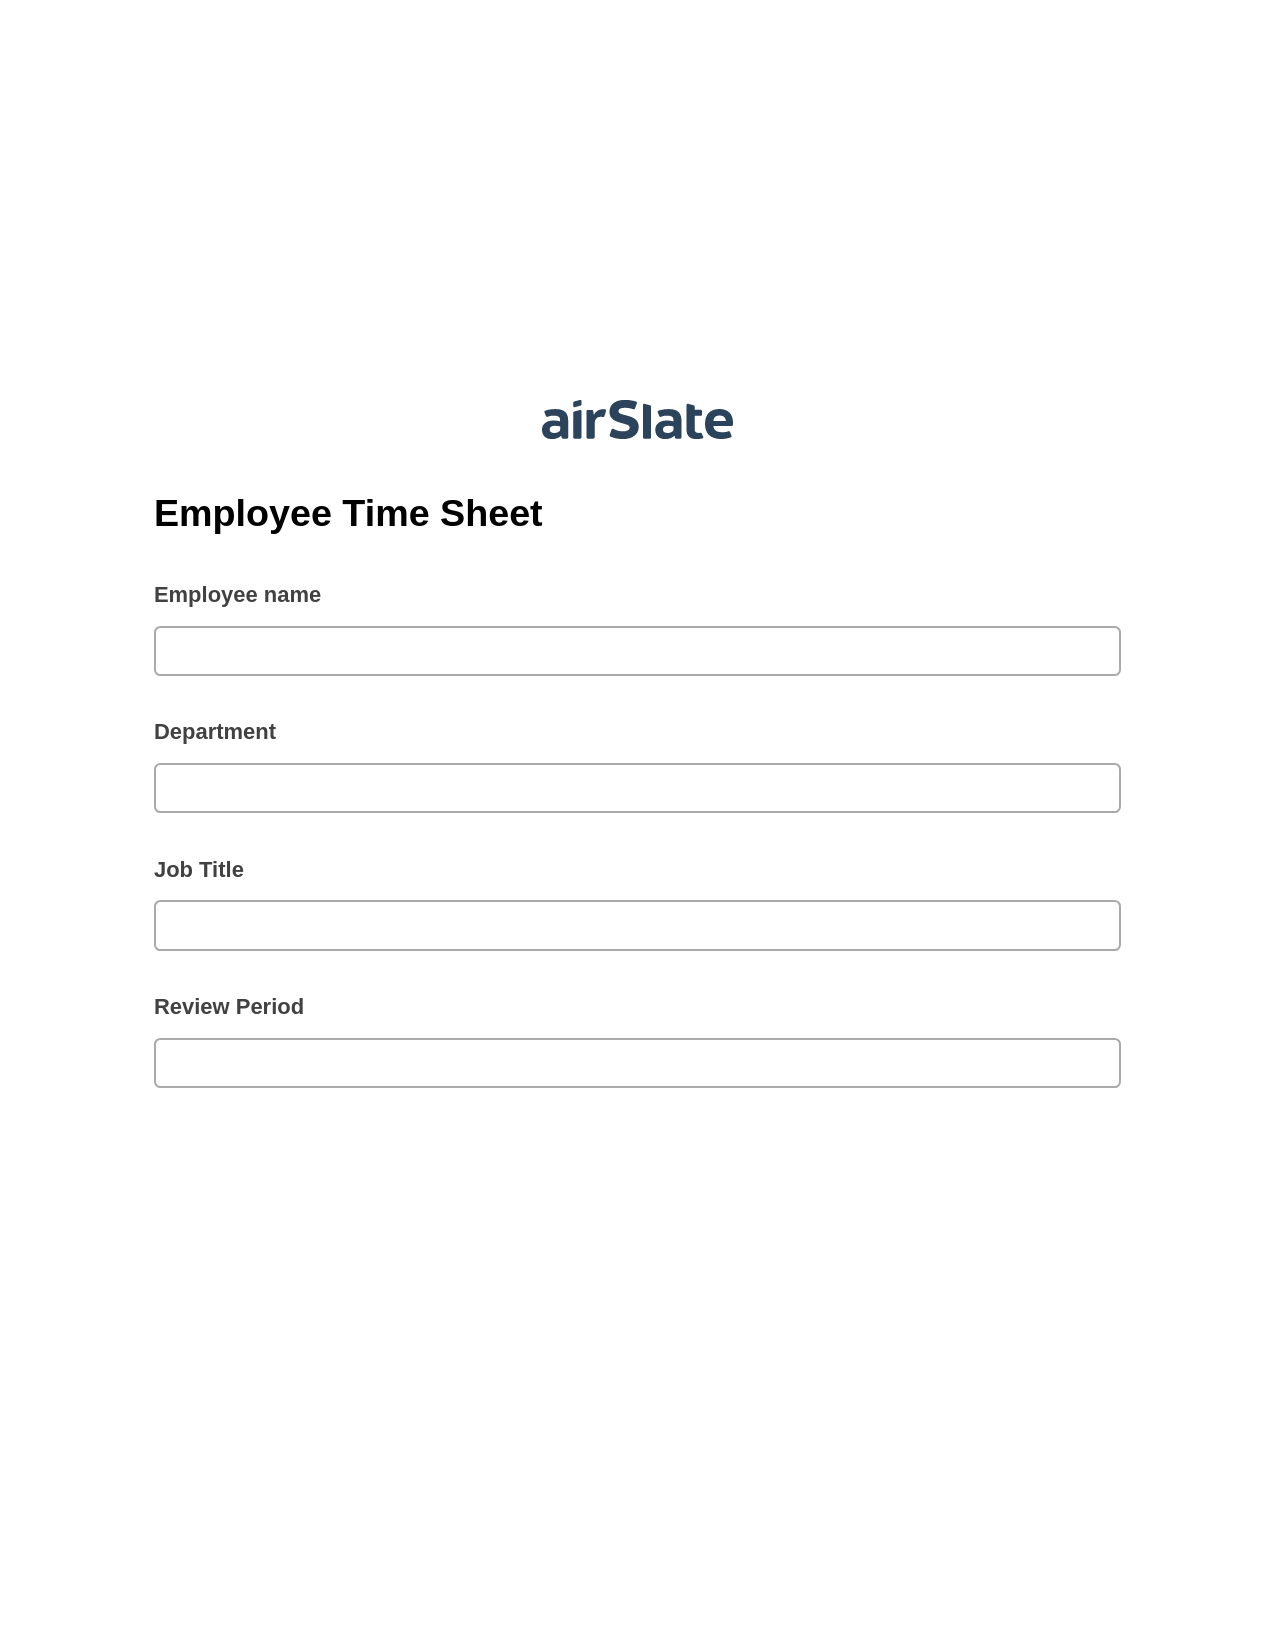 Multirole Employee Time Sheet Pre-fill from Salesforce Records Bot, Create slate addon, Archive to Dropbox Bot